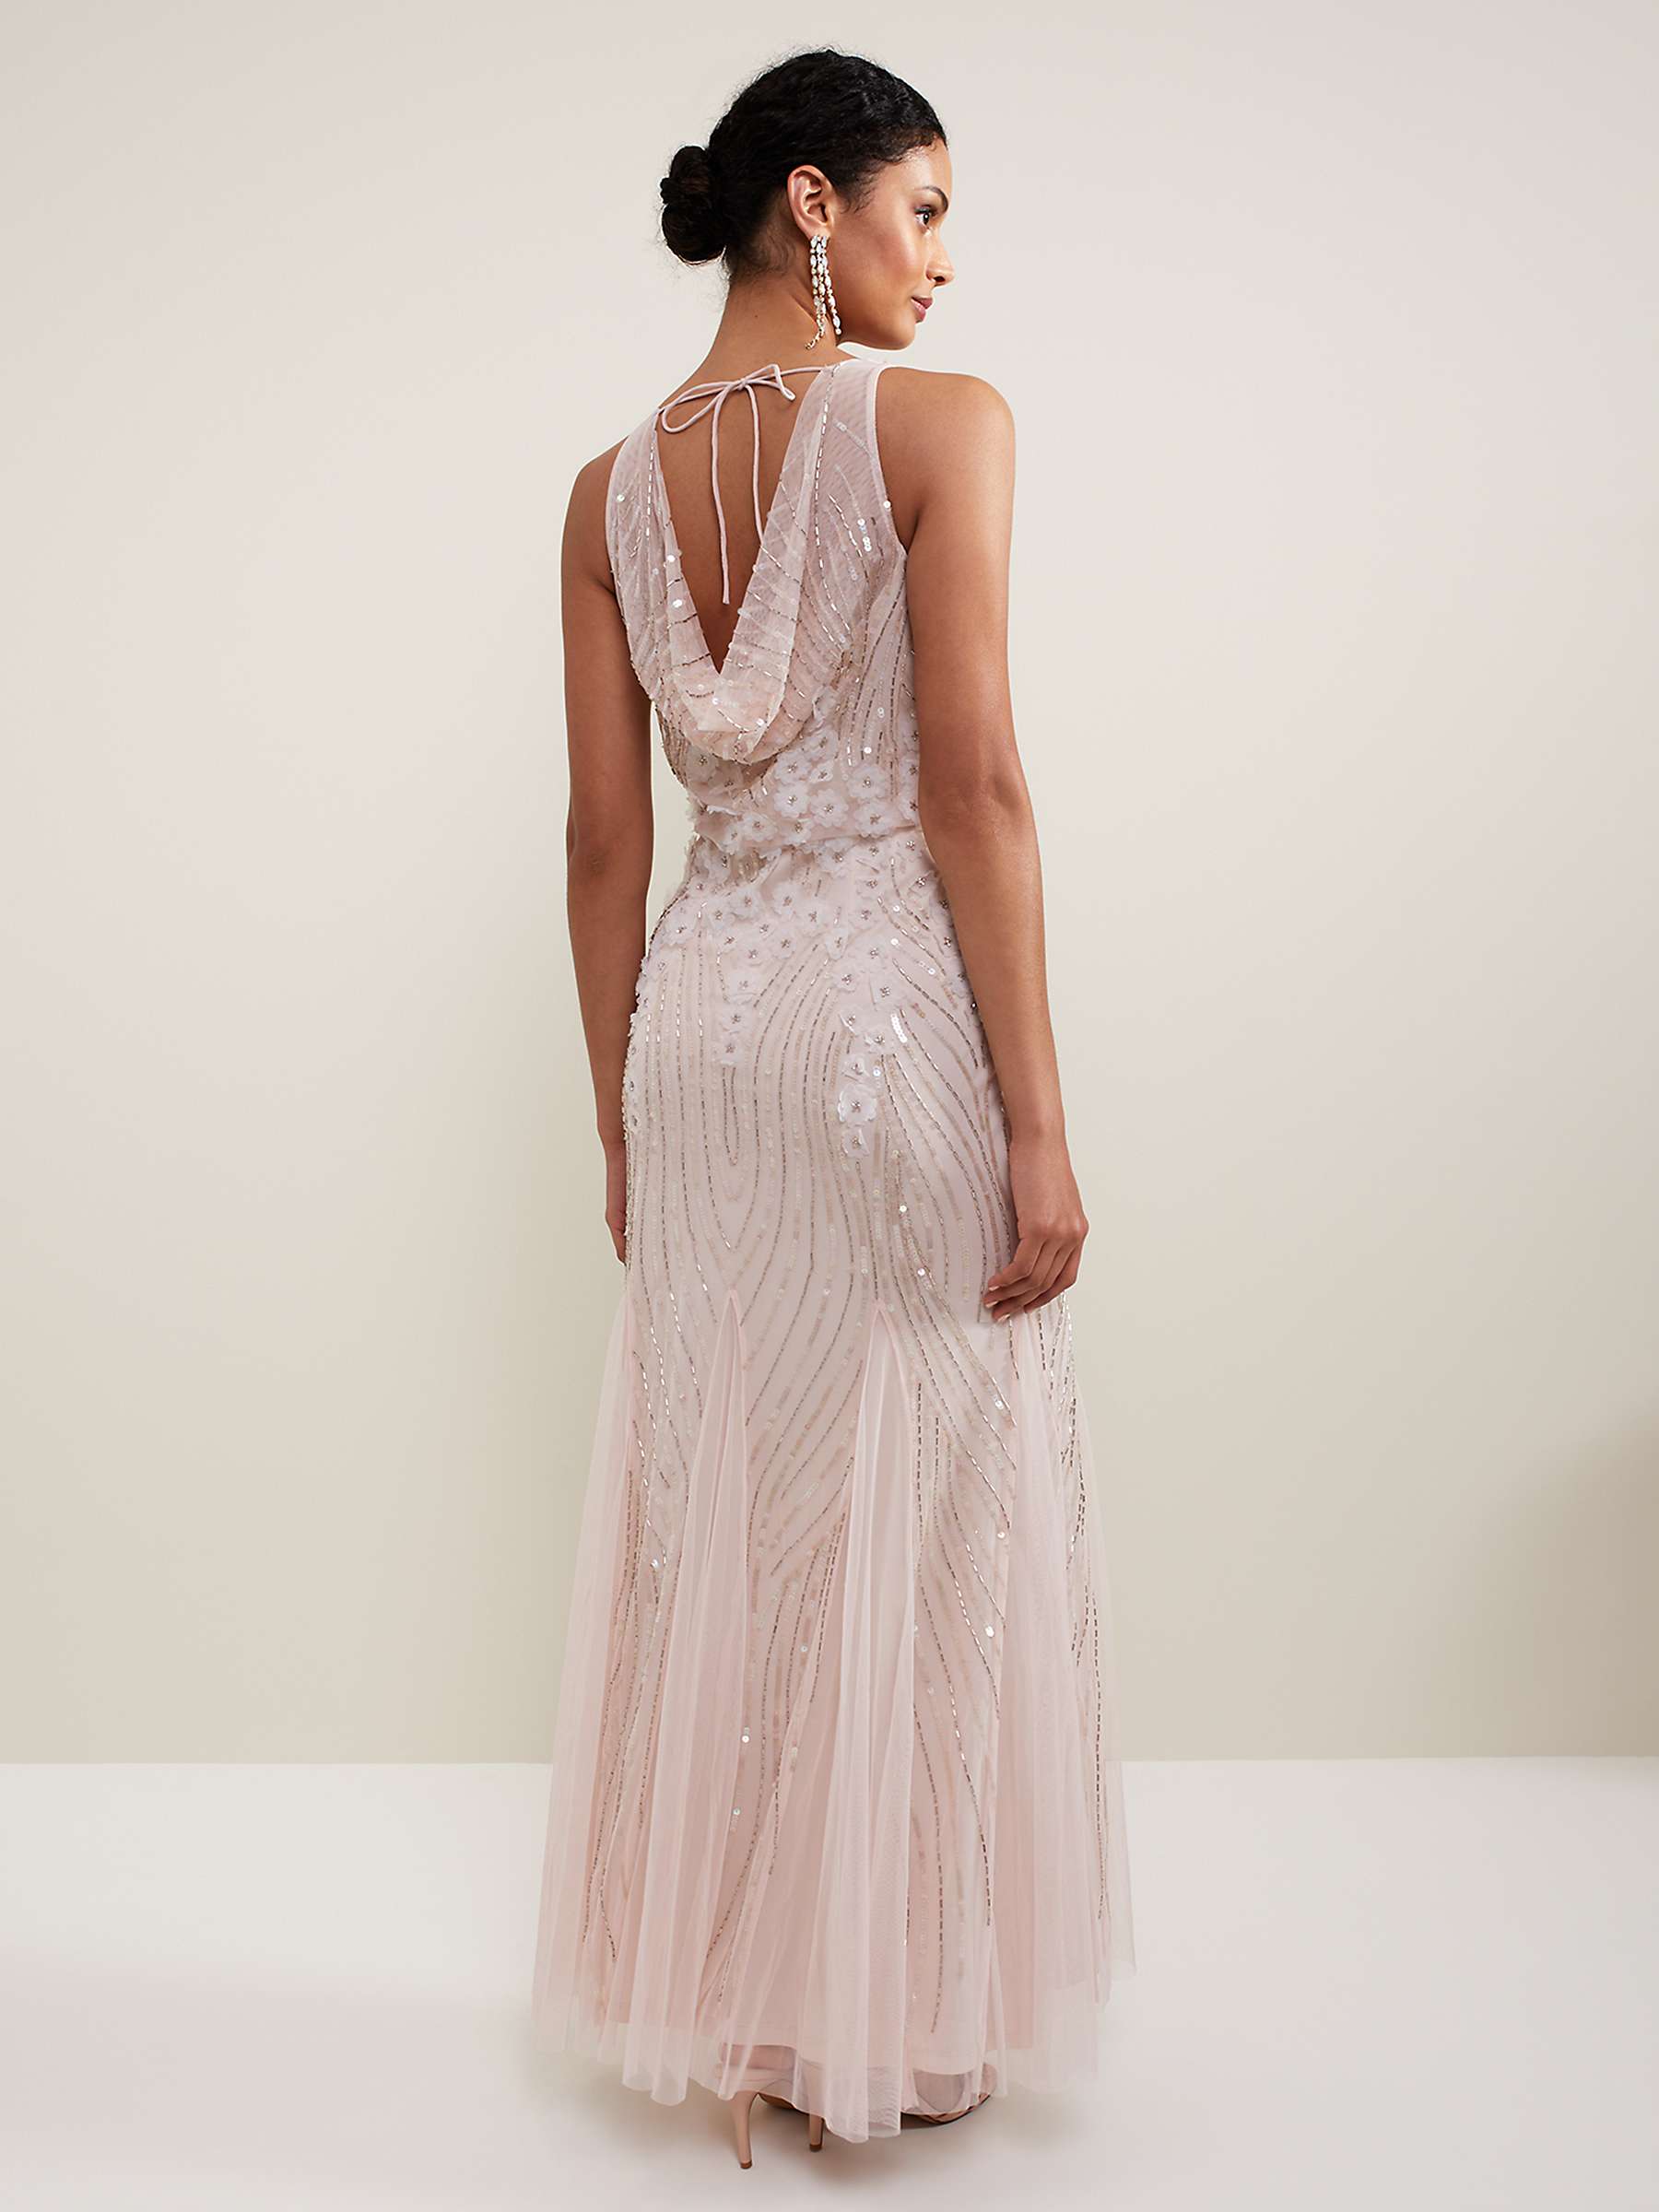 Buy Phase Eight Collection 8 Lexi Cowl Back Embellished Maxi Dress, Pale Pink Online at johnlewis.com